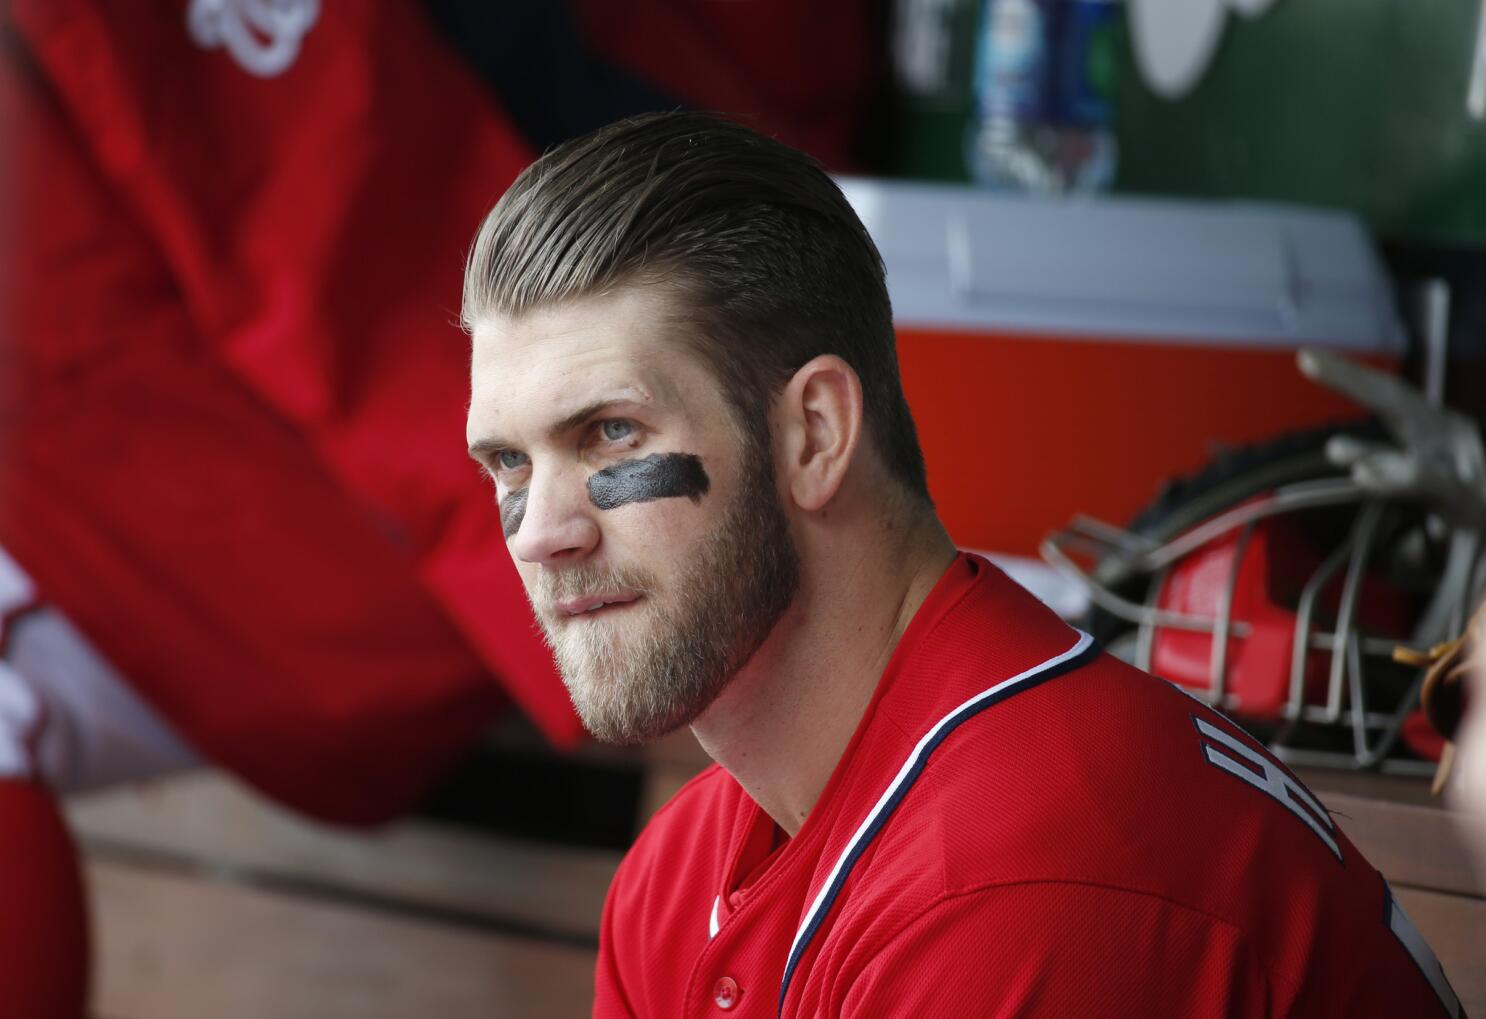 Dodgers fans wanted Bryce Harper, but the team didn't need him